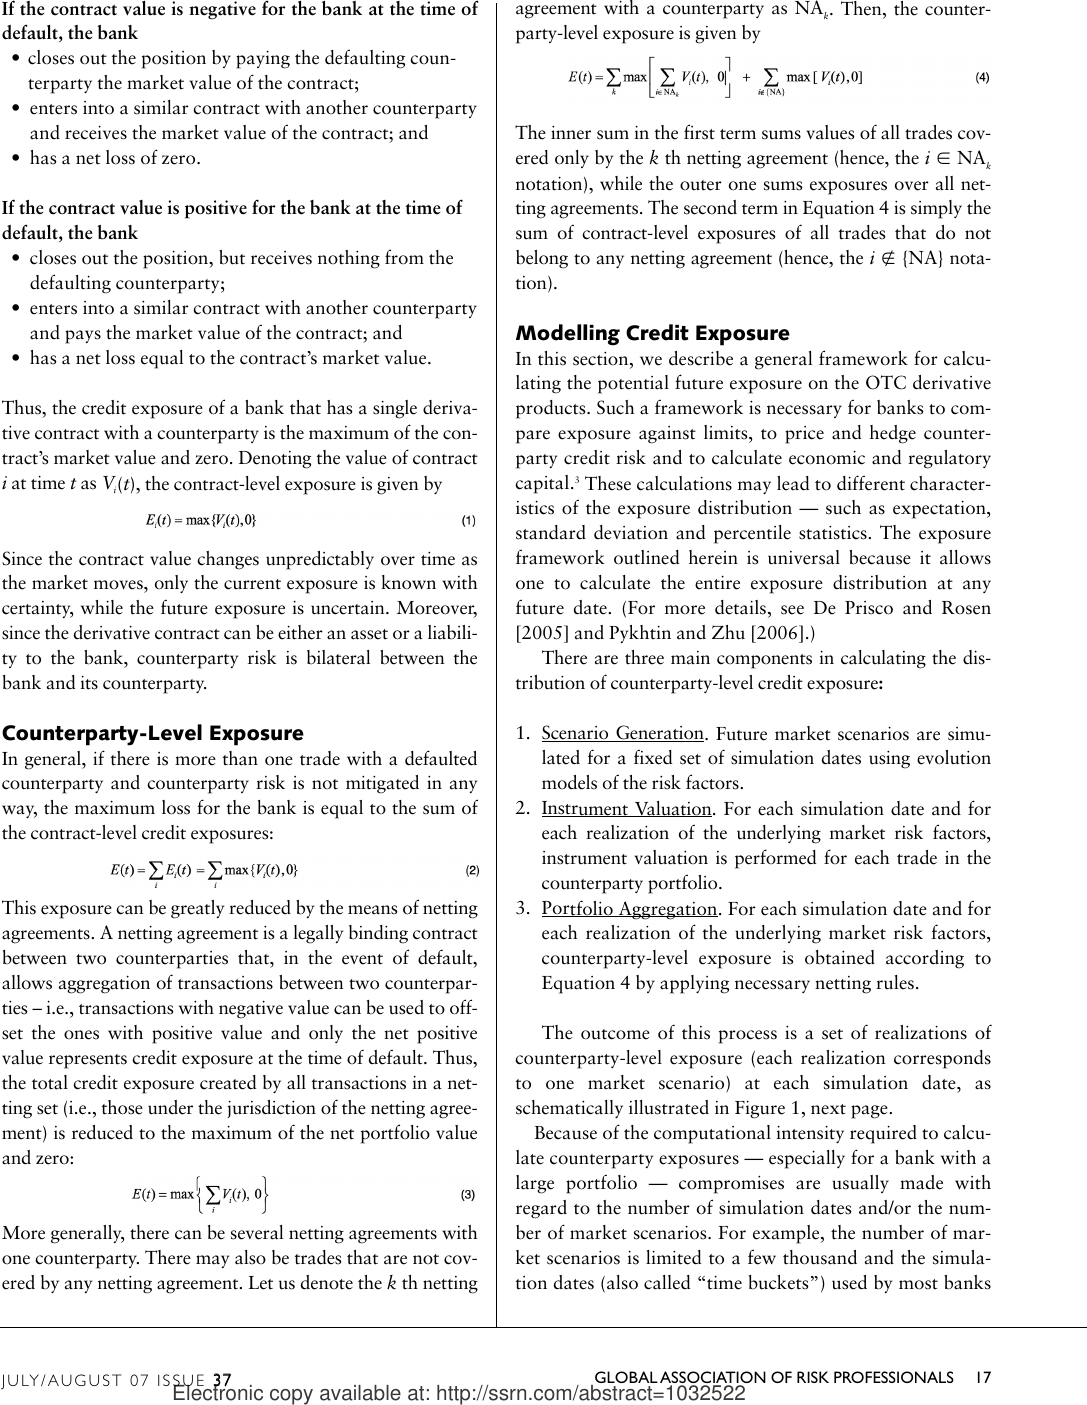 Page 2 of 7 - 16_CoverStory_ Pykhtin, Zhu - 2007 A Guide To Ling Counterparty Credit Risk